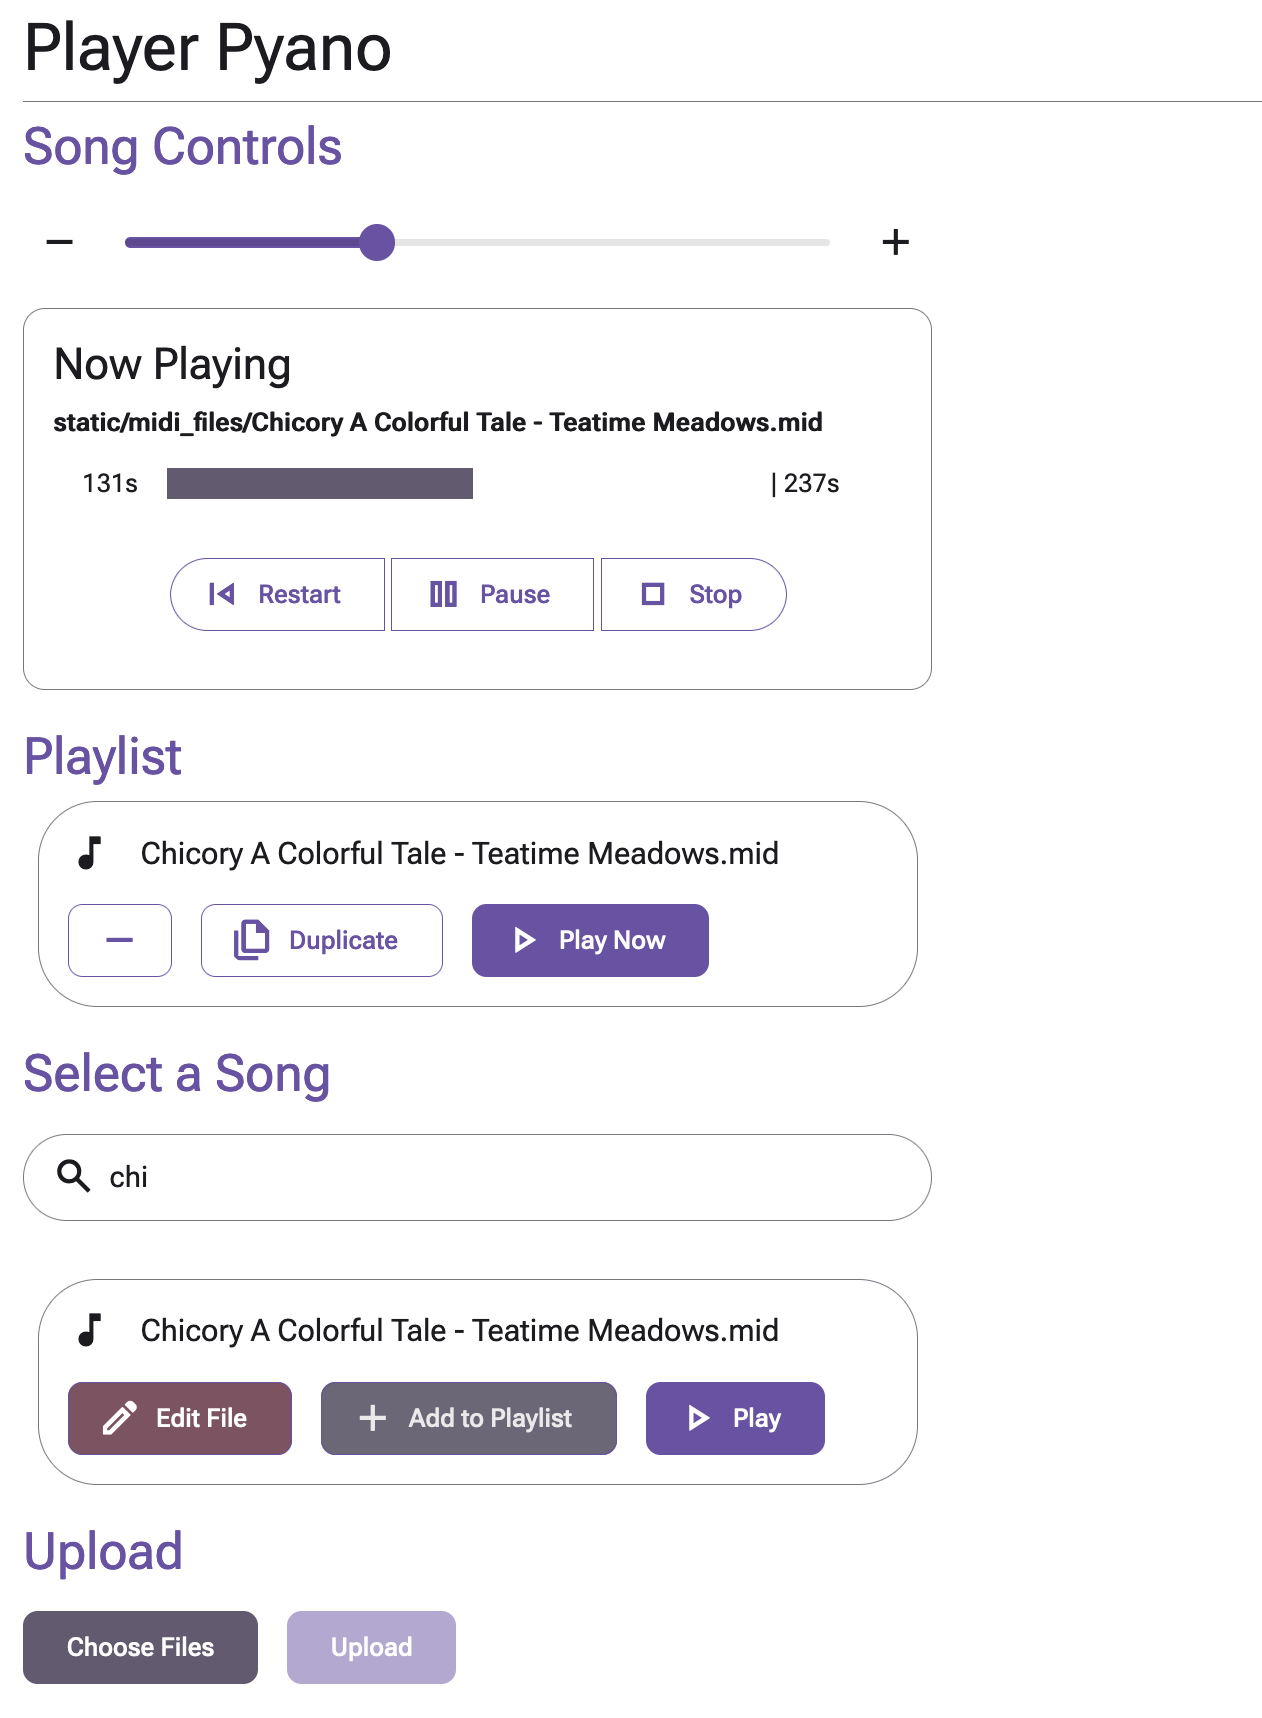 An example screenshot of the application showing play, pause, and song filtering